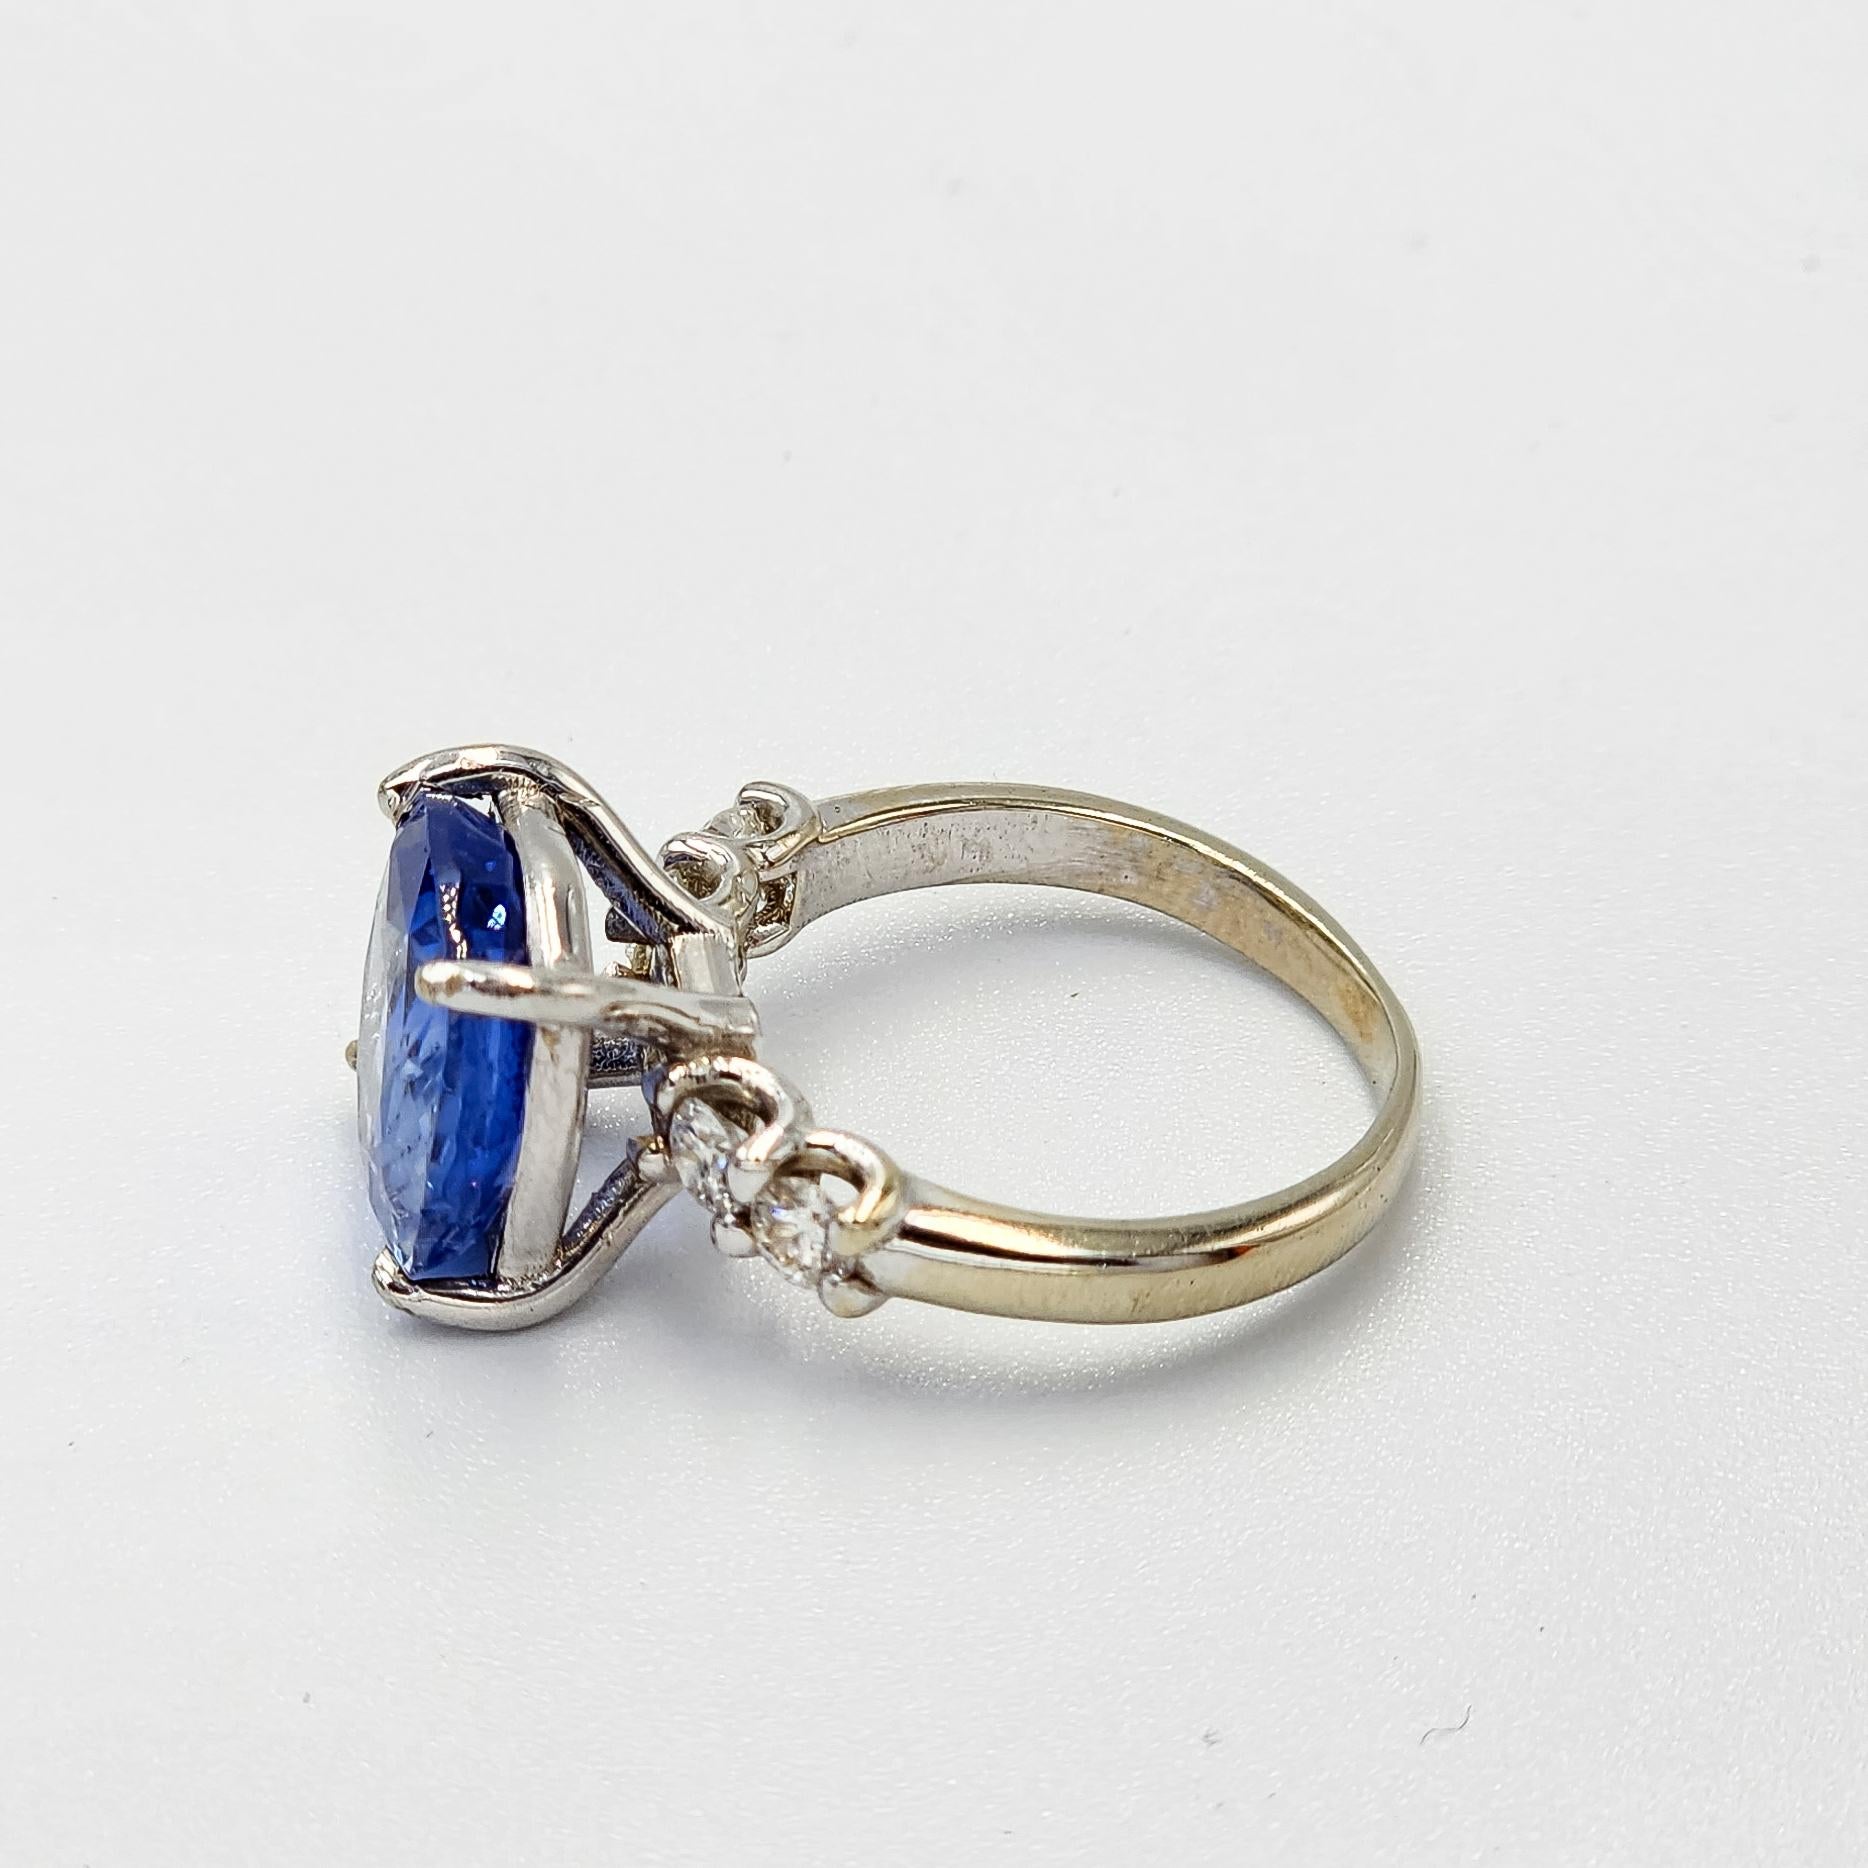 This is a beautiful GIA certified Blue Sapphire Ring with diamonds and 14k gold. It is a beautiful and amazing piece with vivid color, set in a custom designed ring to enhance its natural beauty!
Blue Sapphire : 5.99 carats
Certificate:  